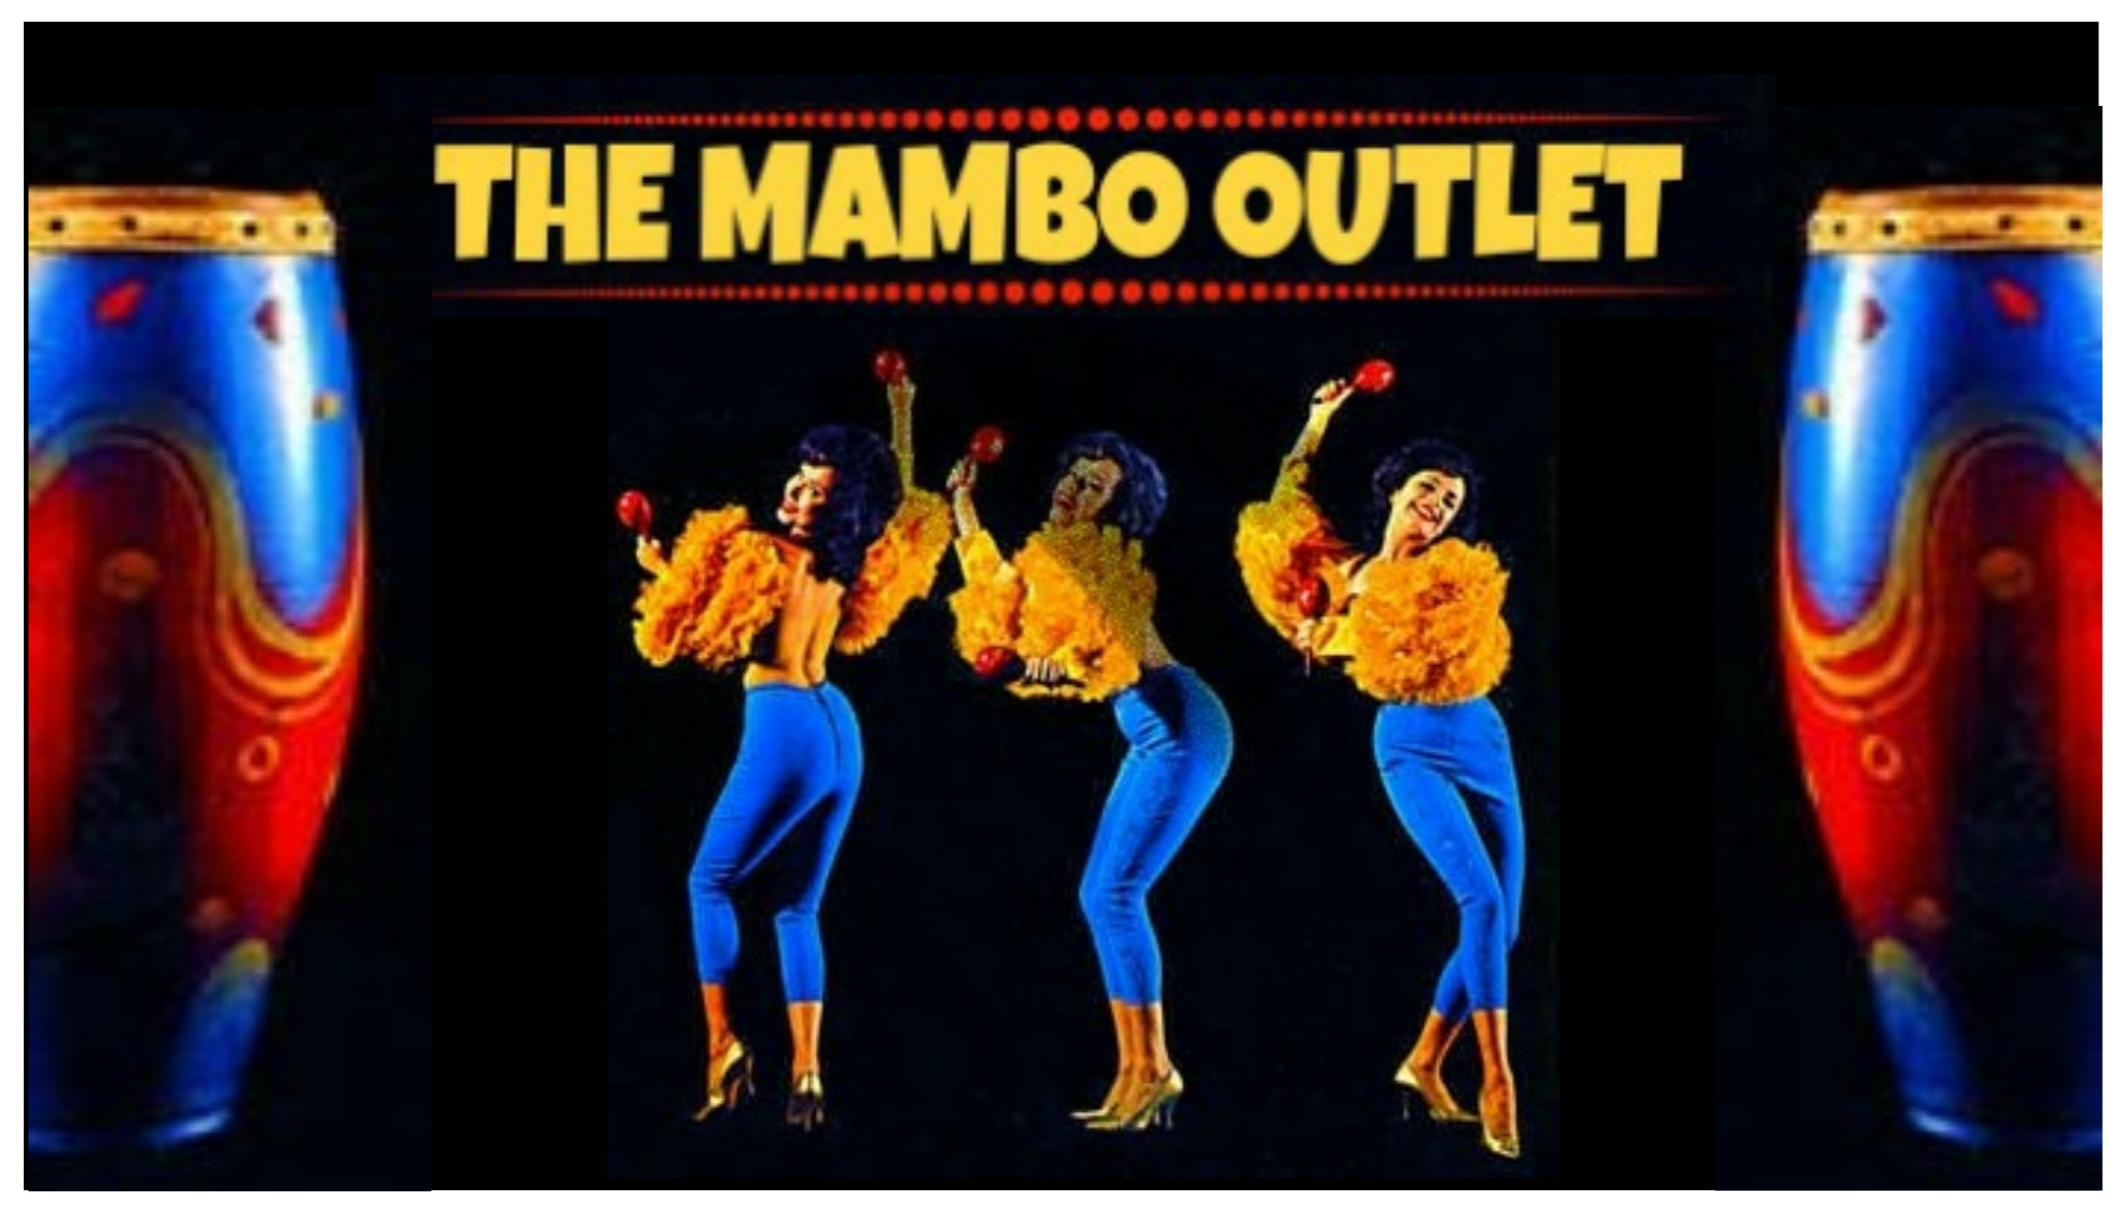 The Mambo Outlet – January 19, 2019